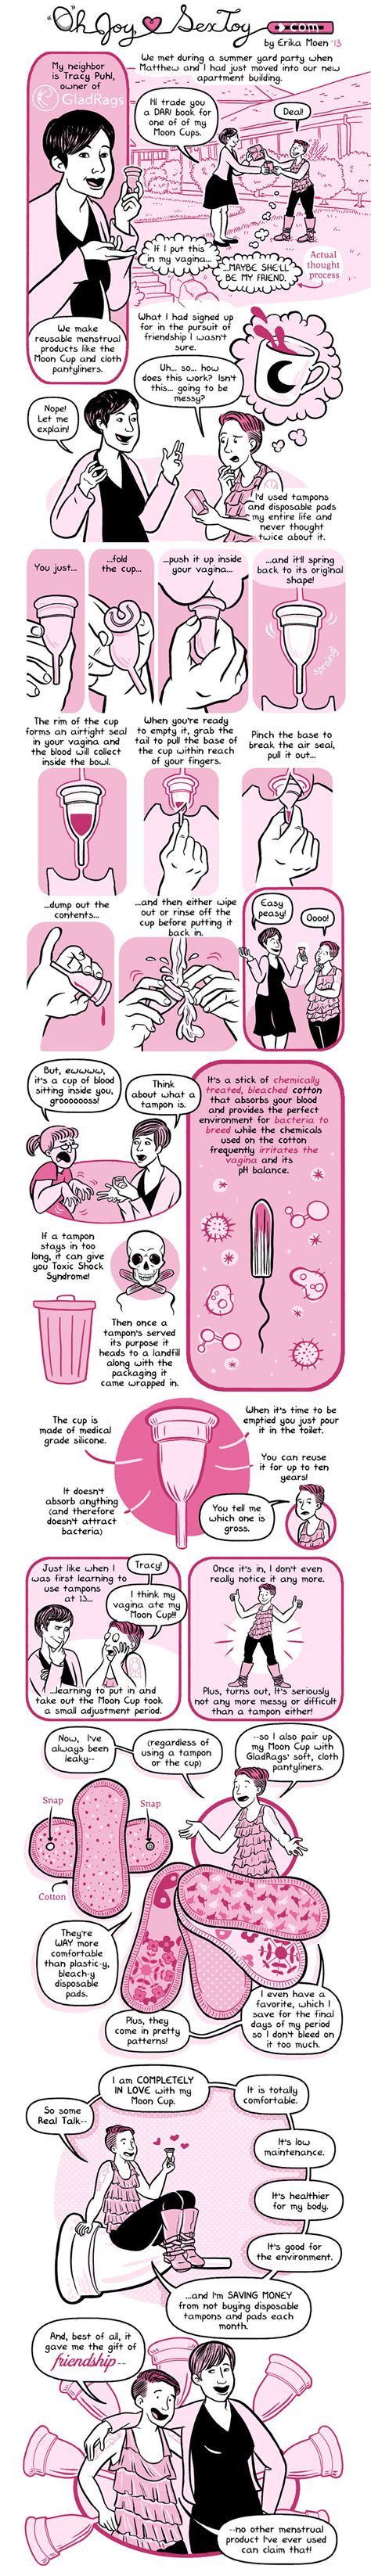 oh joy sex toy is a web comic by the amazing erica moen where she and her husband review sex